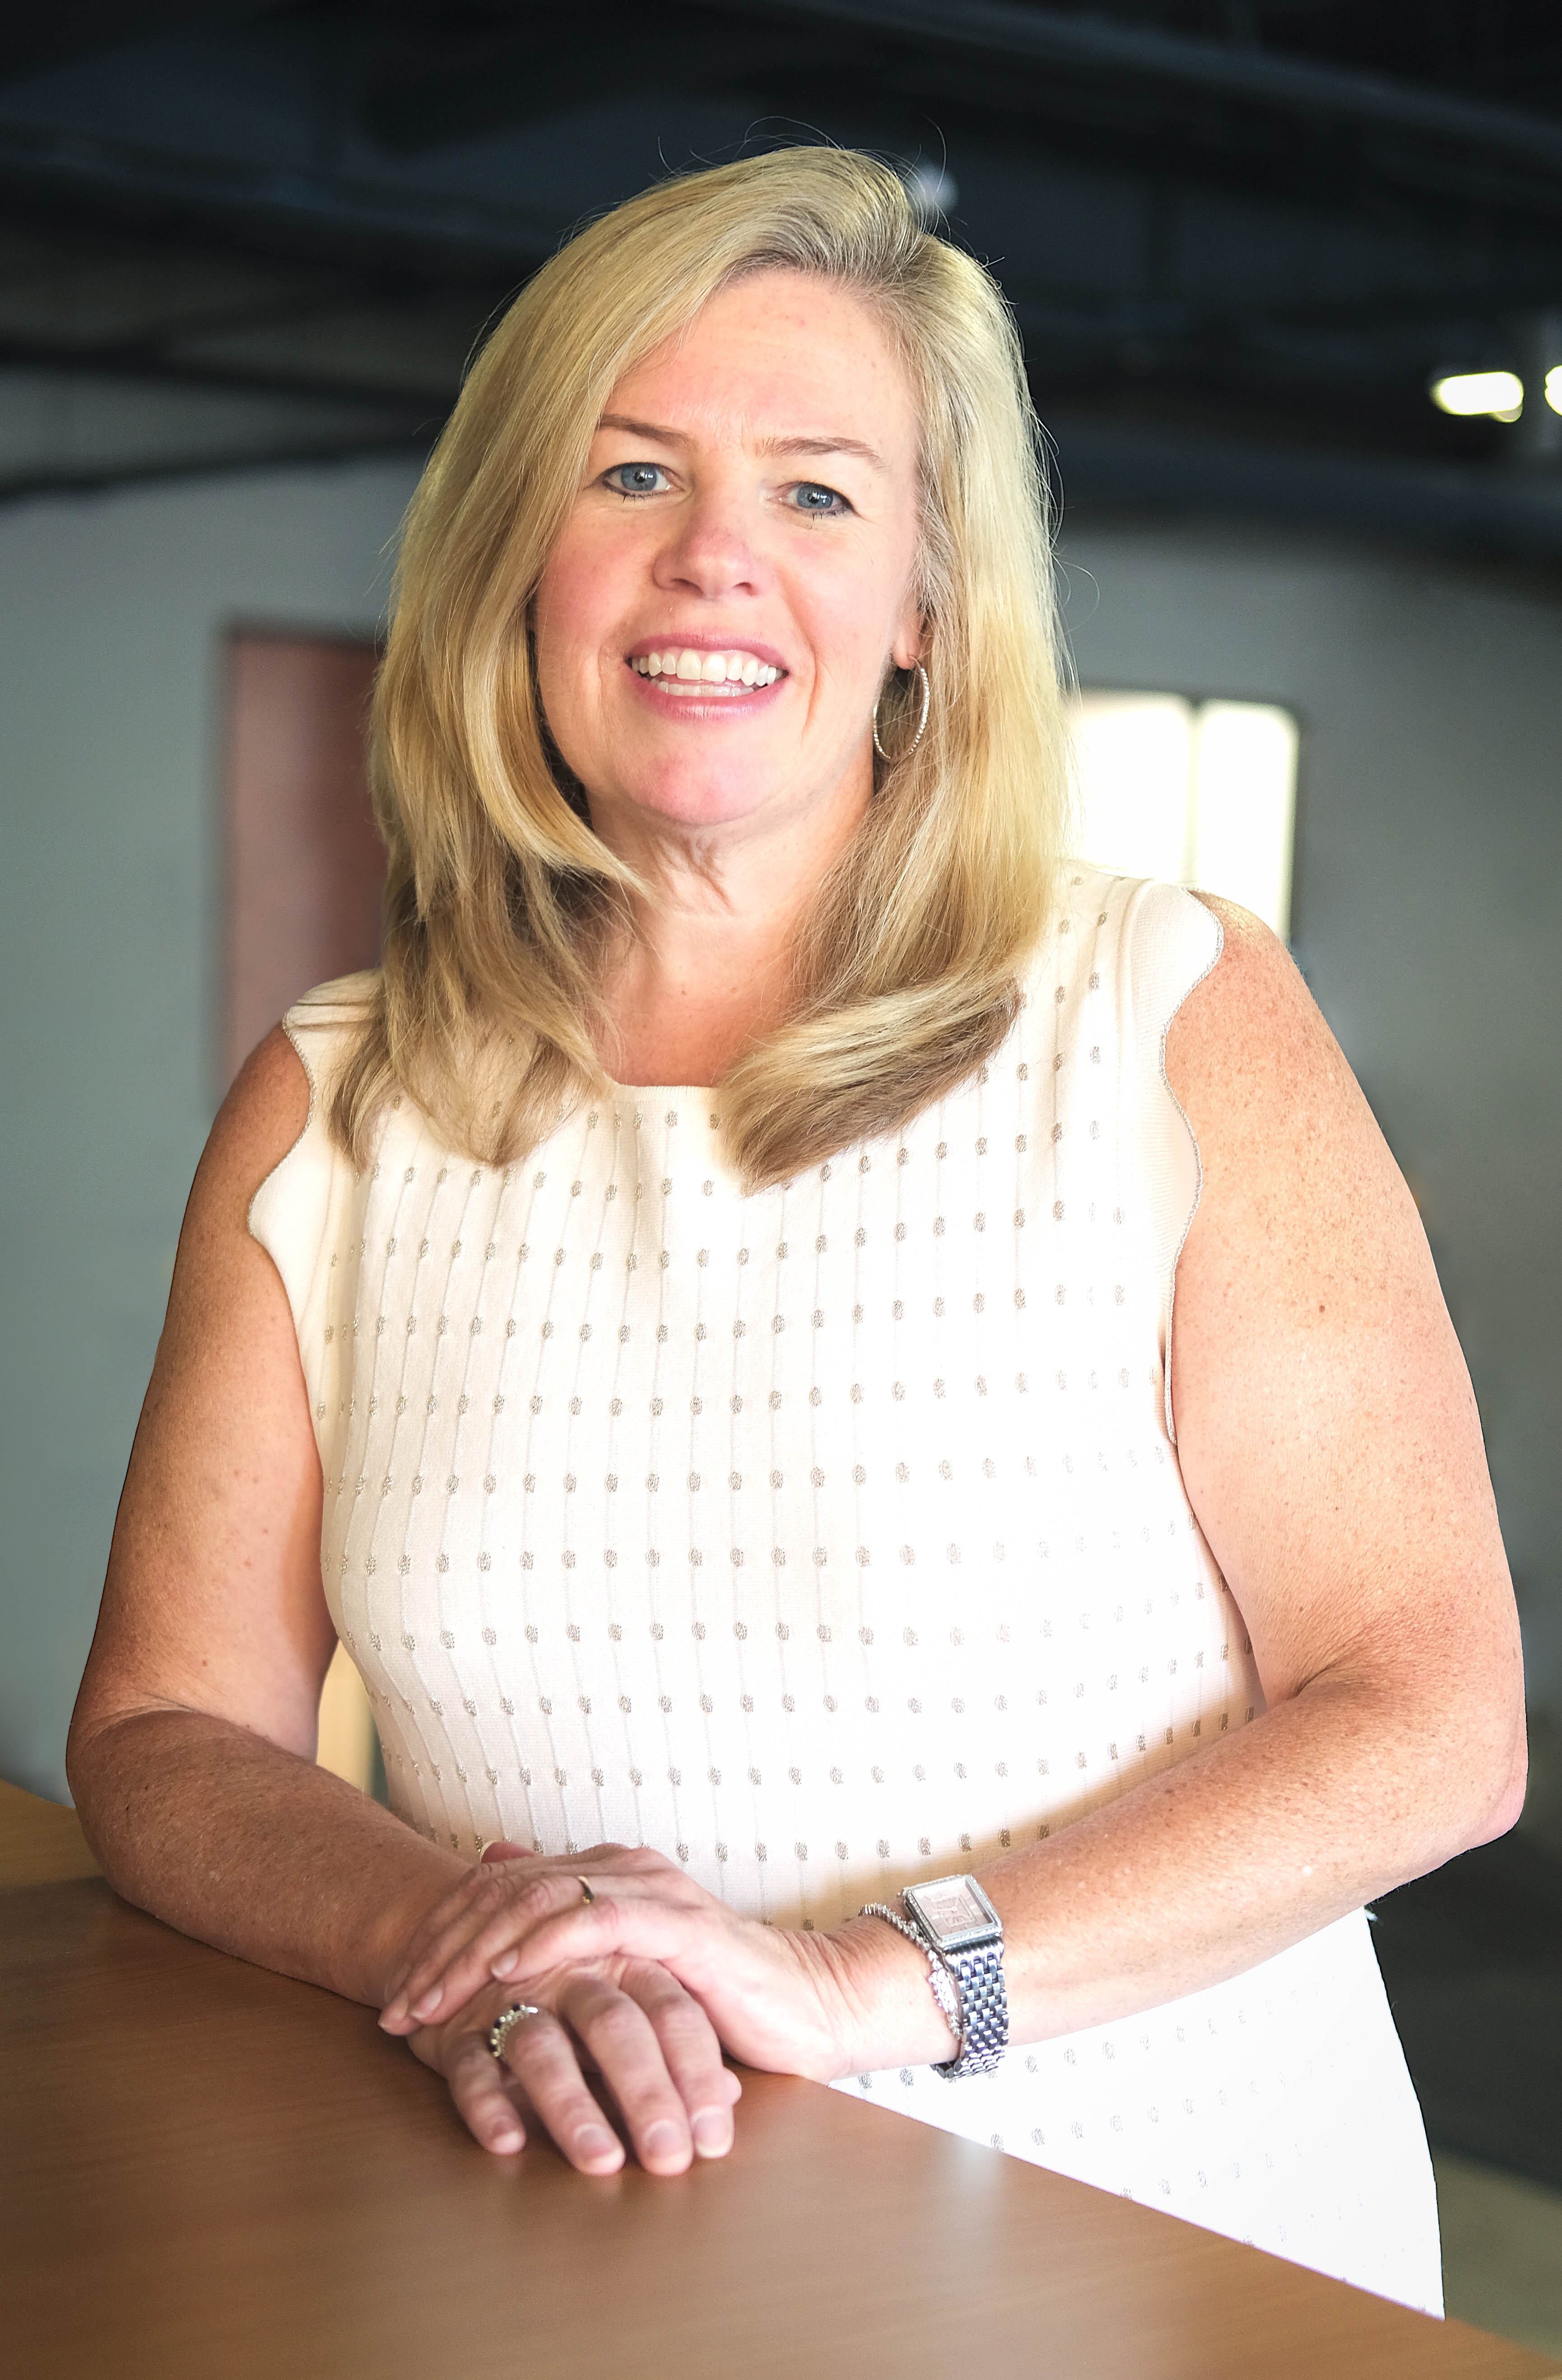 Clear Capital announced Sheila Ryan has joined the company as Chief People Officer